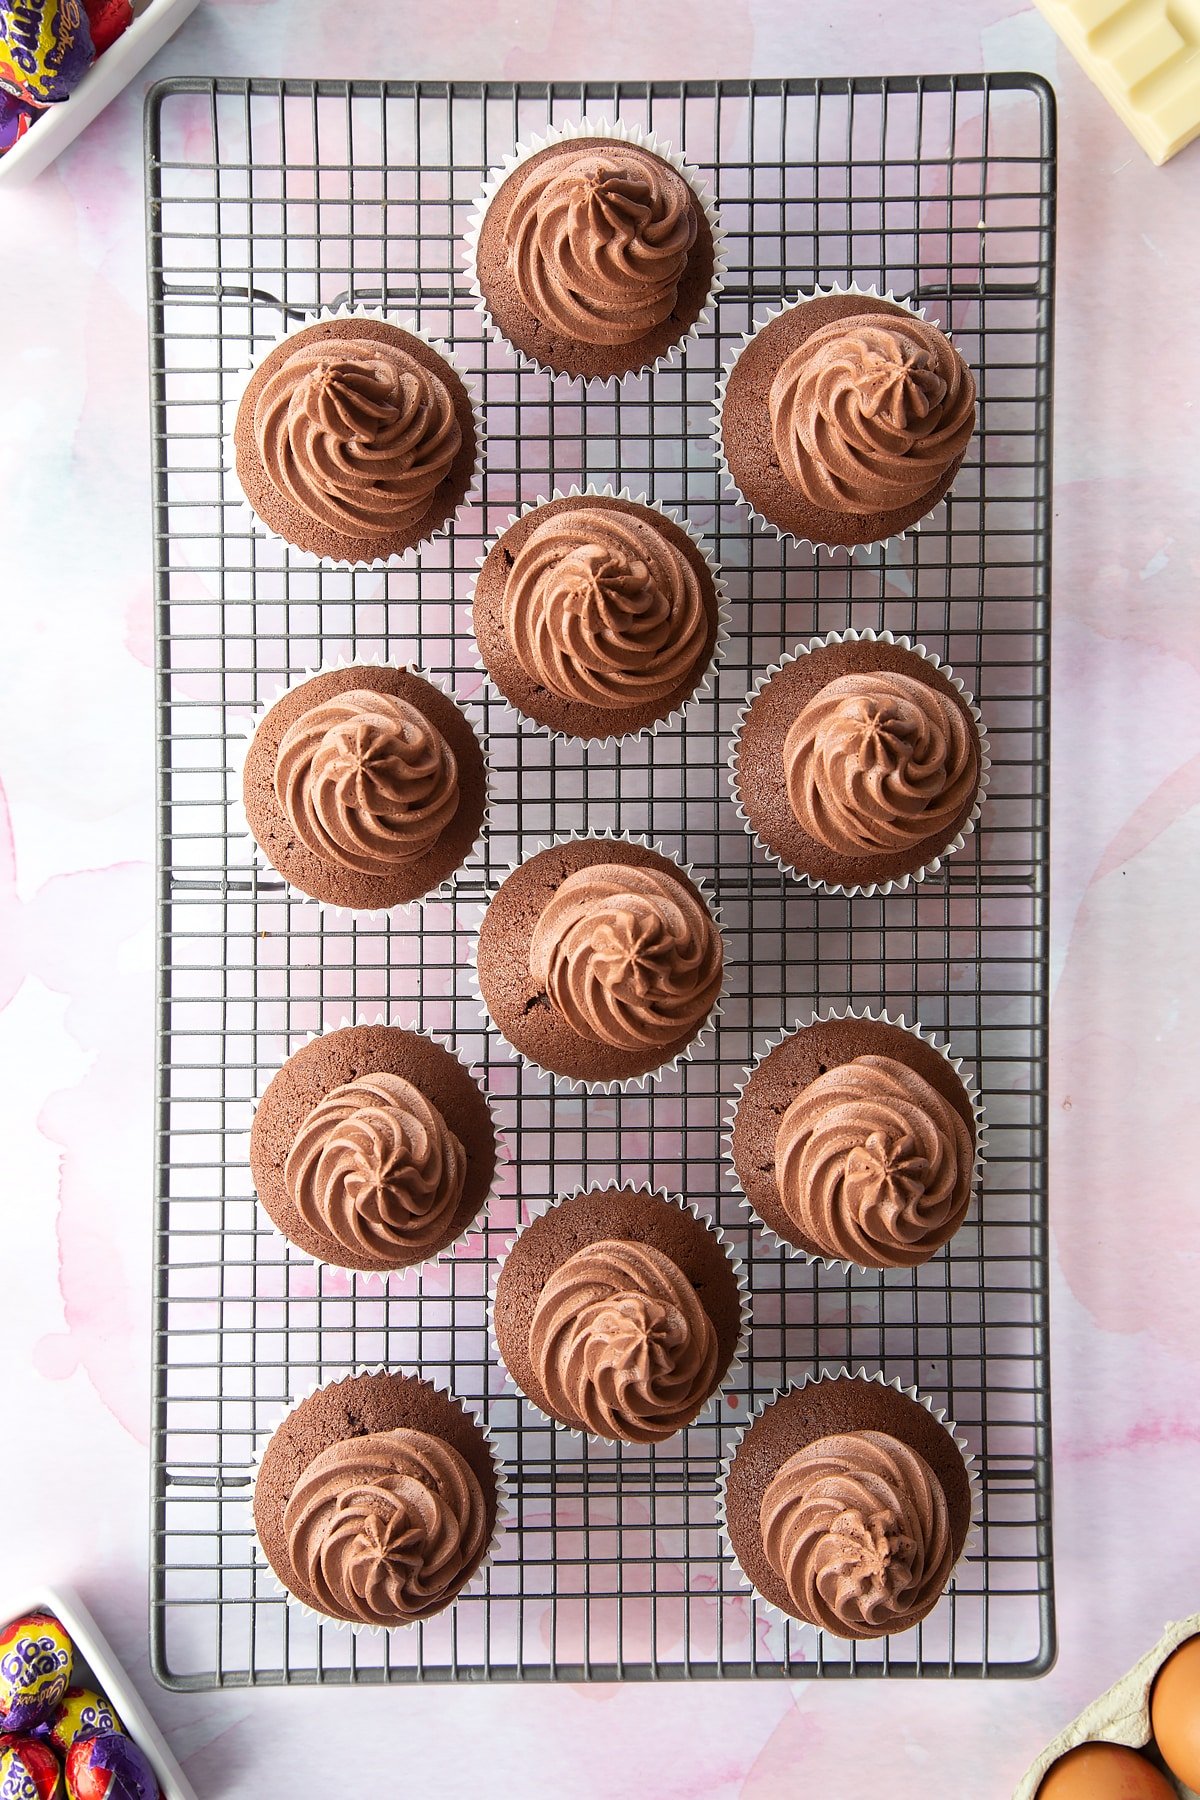 Chocolate cupcakes on a cooling rack. They are topped with swirls of chocolate buttercream.